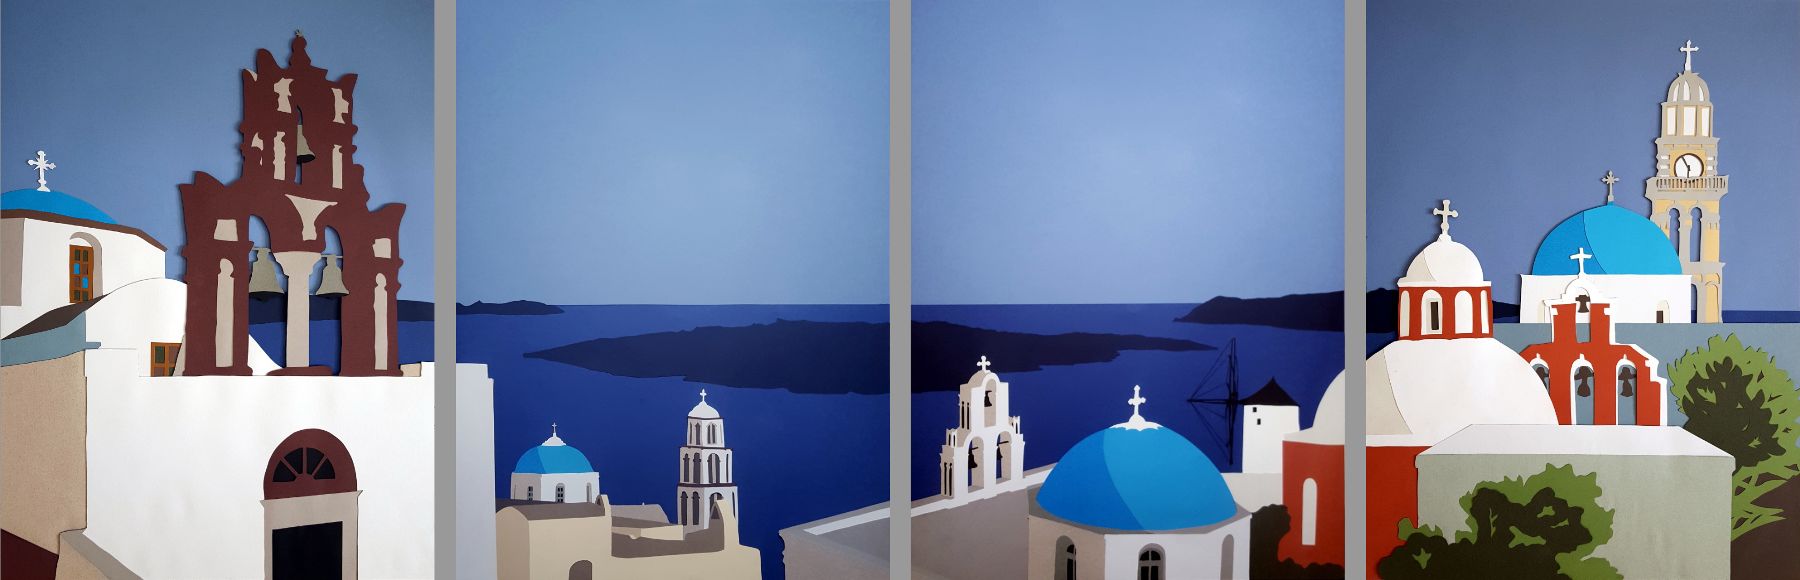 An idealized view of the Santorini caldera from Fira or Oia,
                depicting many colorful churches and an ancient windmill,
                in four segments.